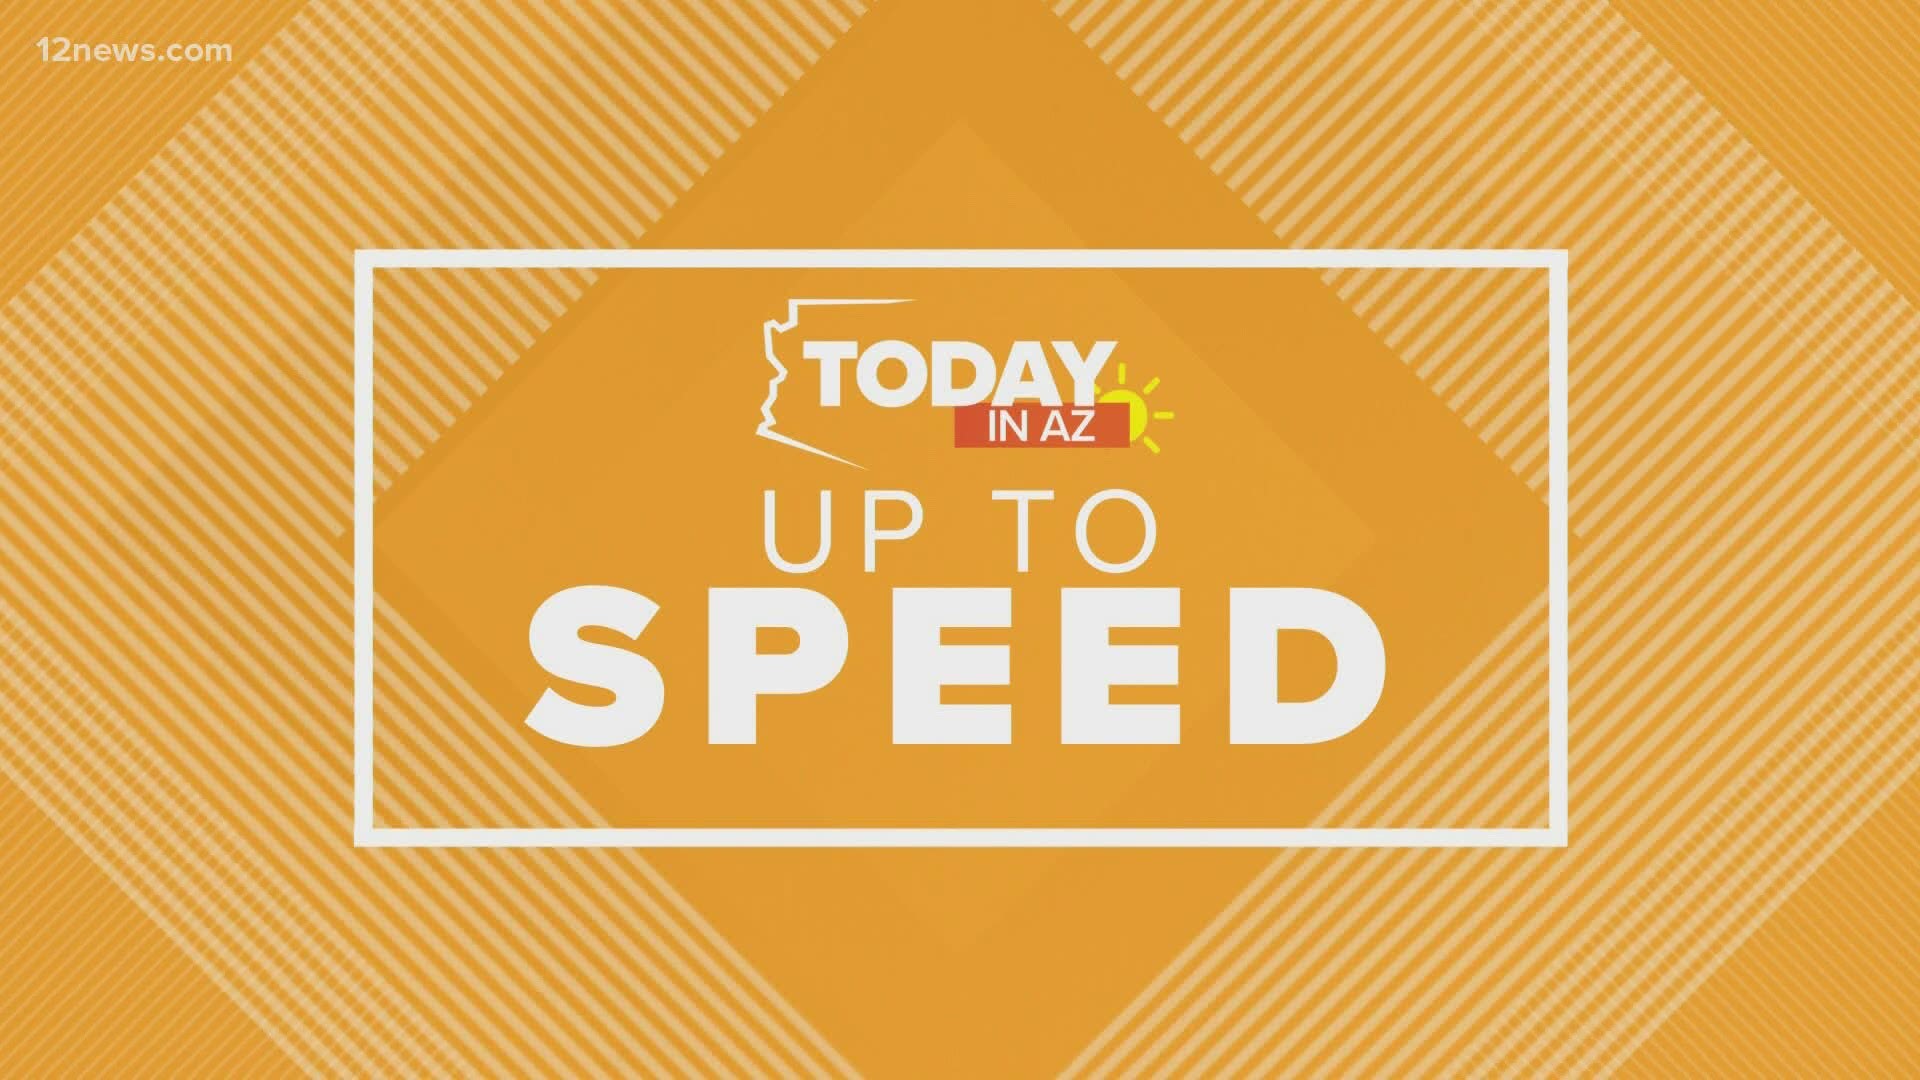 Get 'Up to Speed' on Tuesday morning.